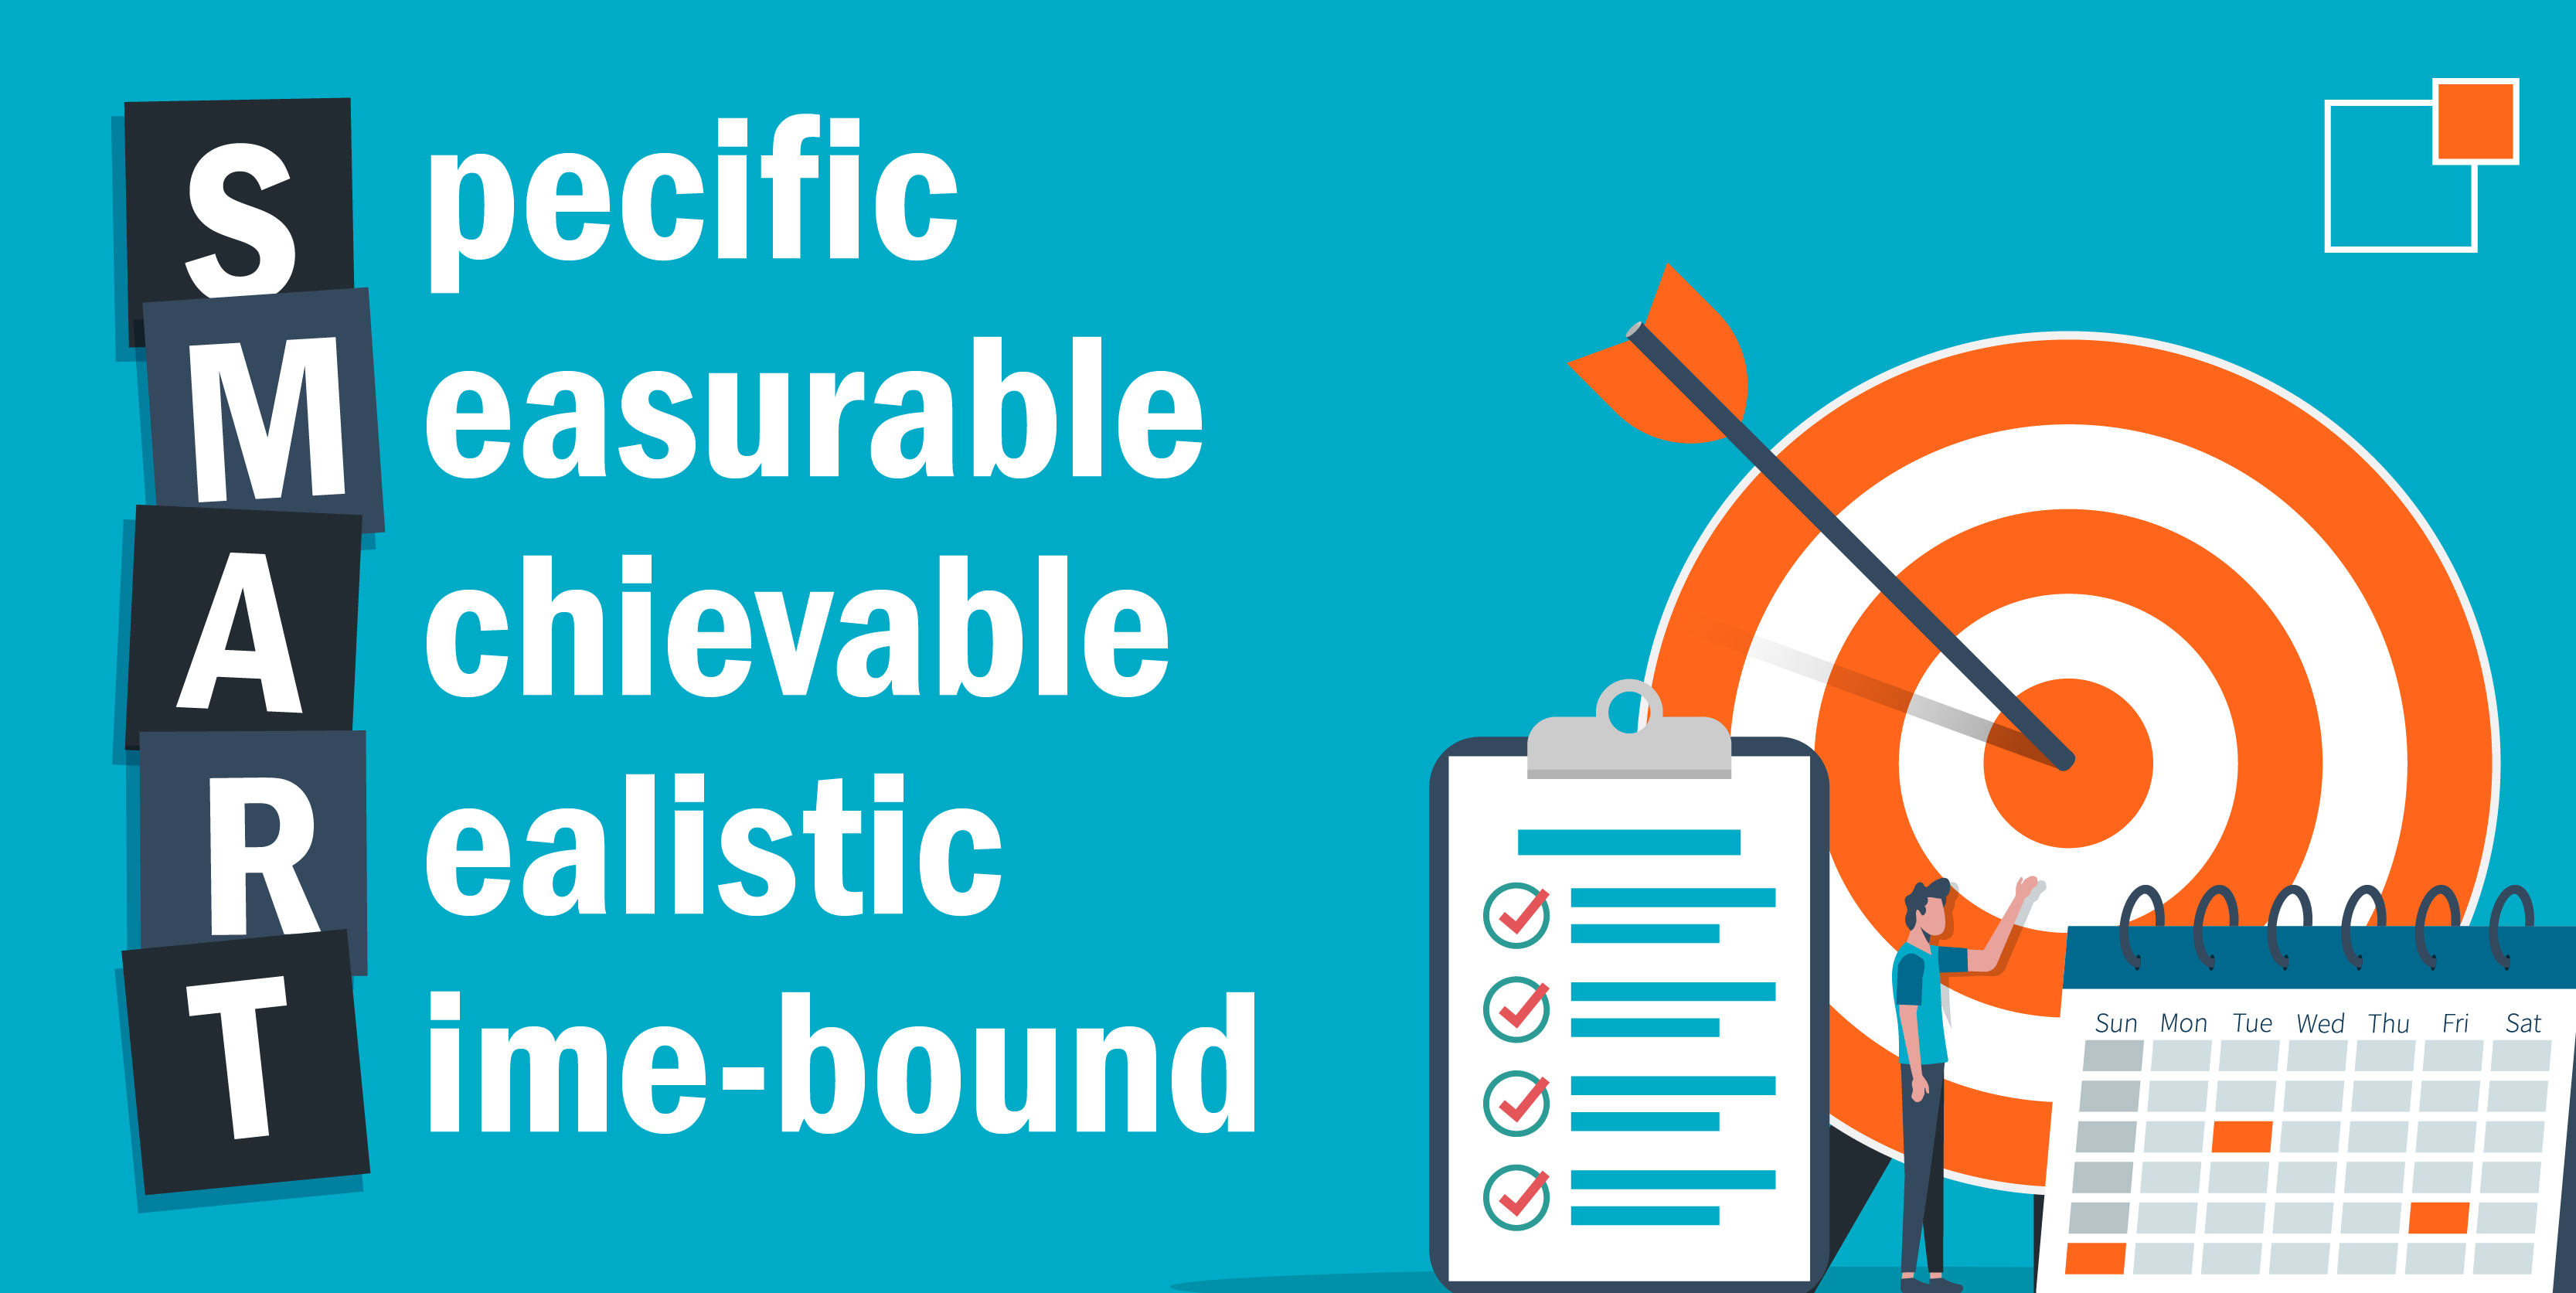 Specific, Measurable, Achievable, Realistic, Time-bound